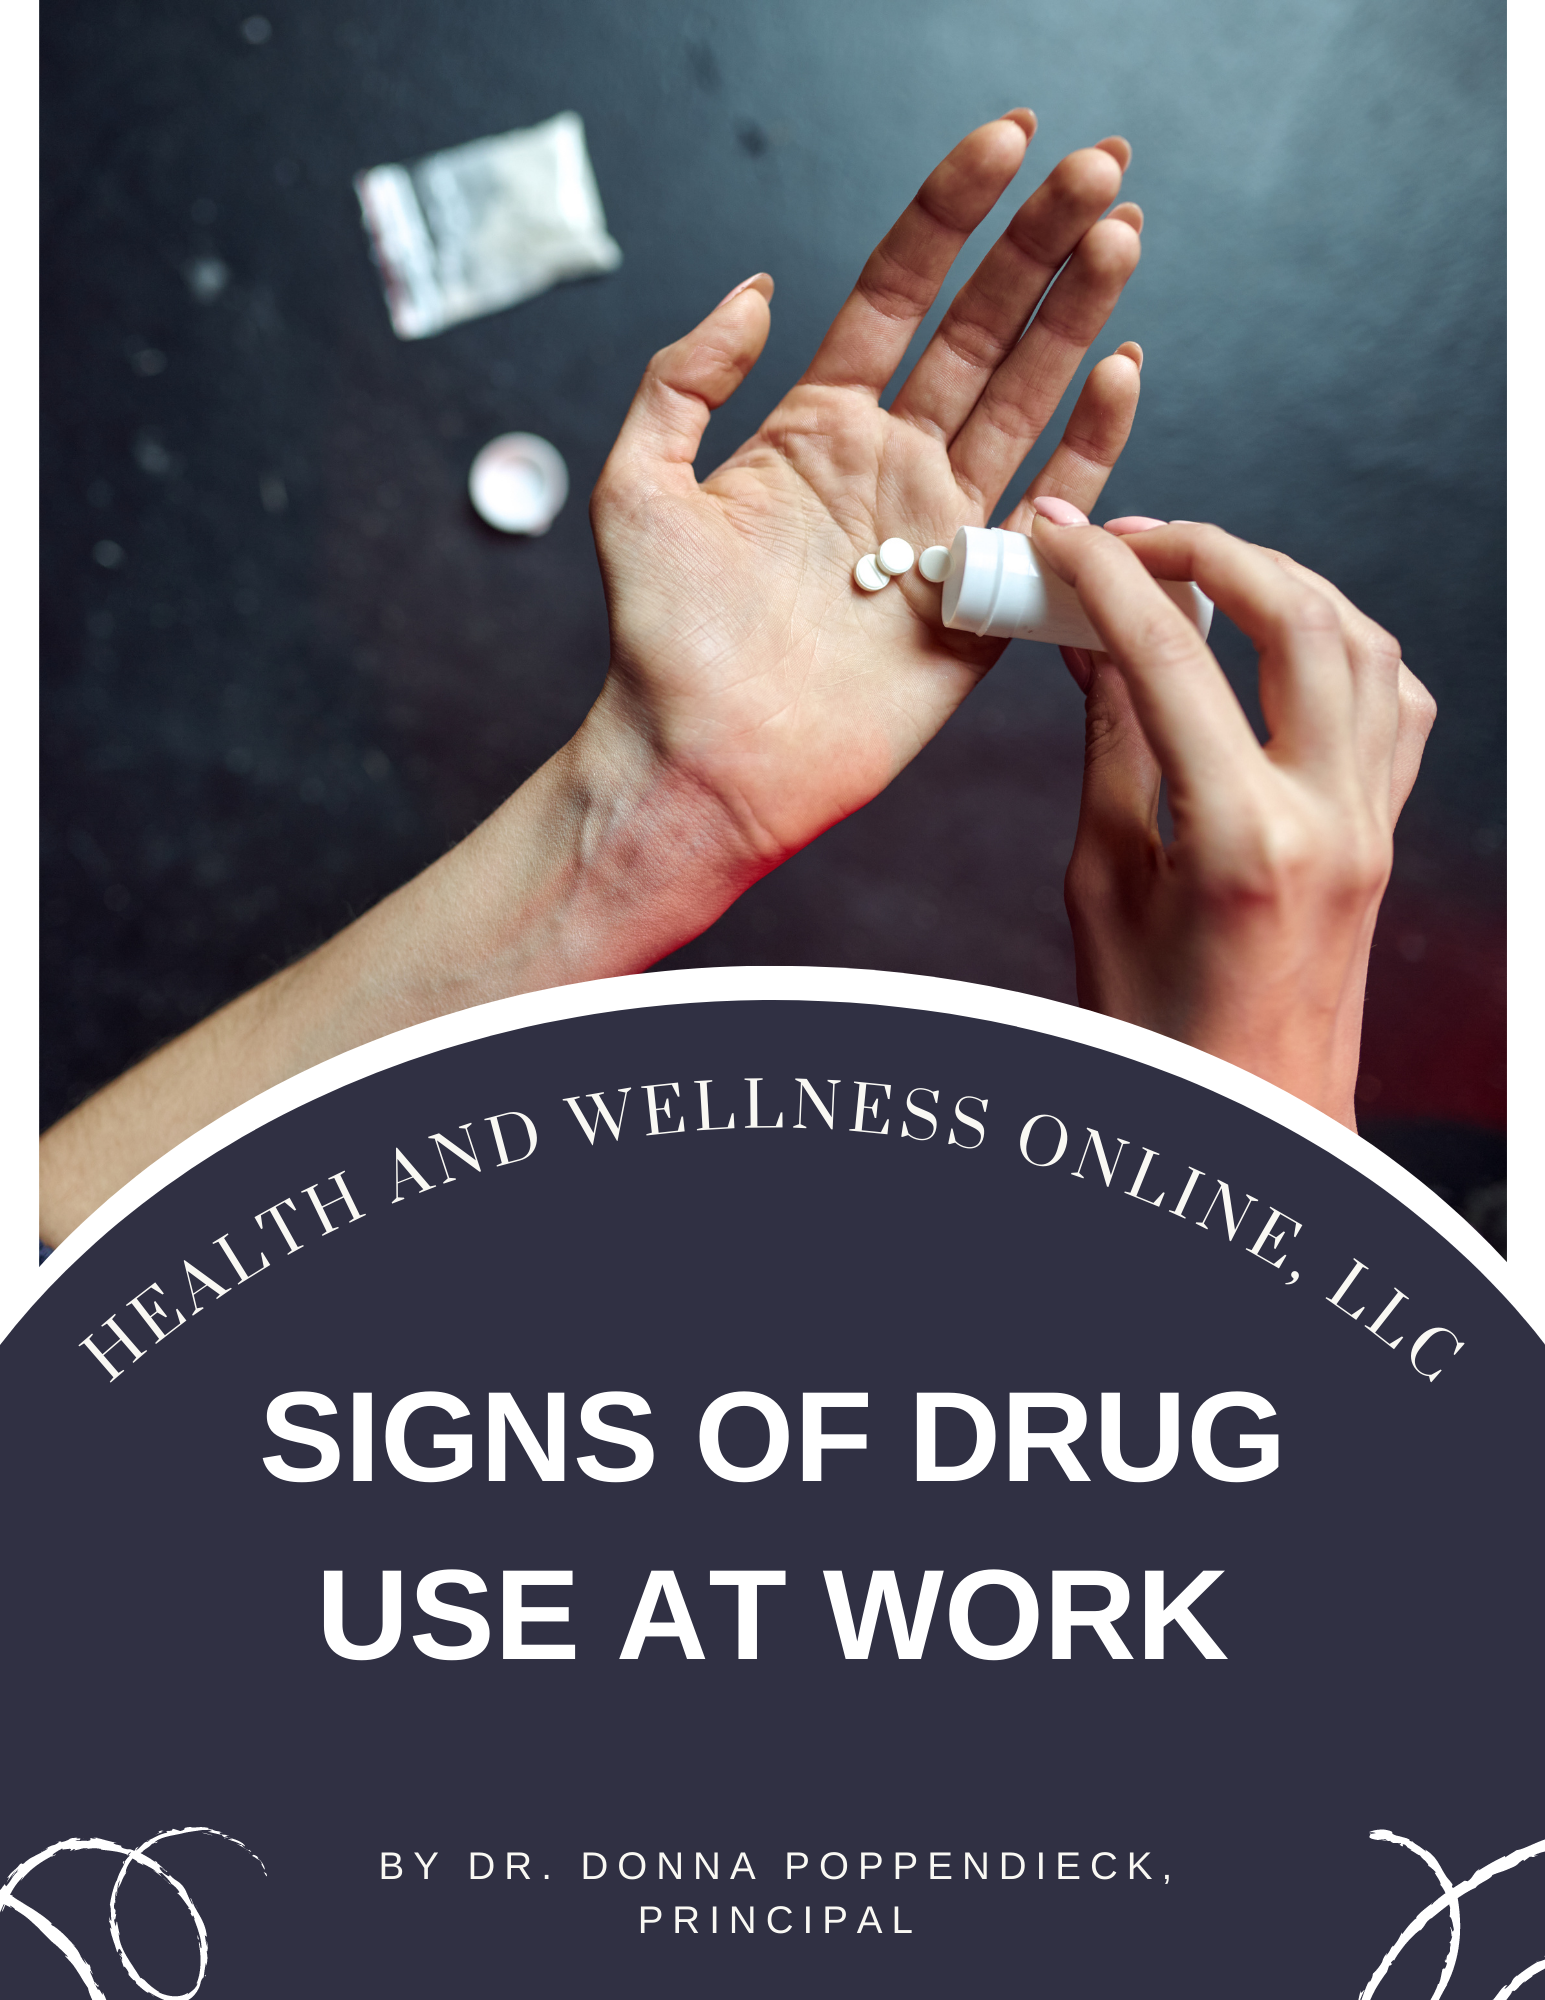 Signs of Drug Use at Work is a Course by Dr. Donna Poppendieck from Health and Wellness Online.